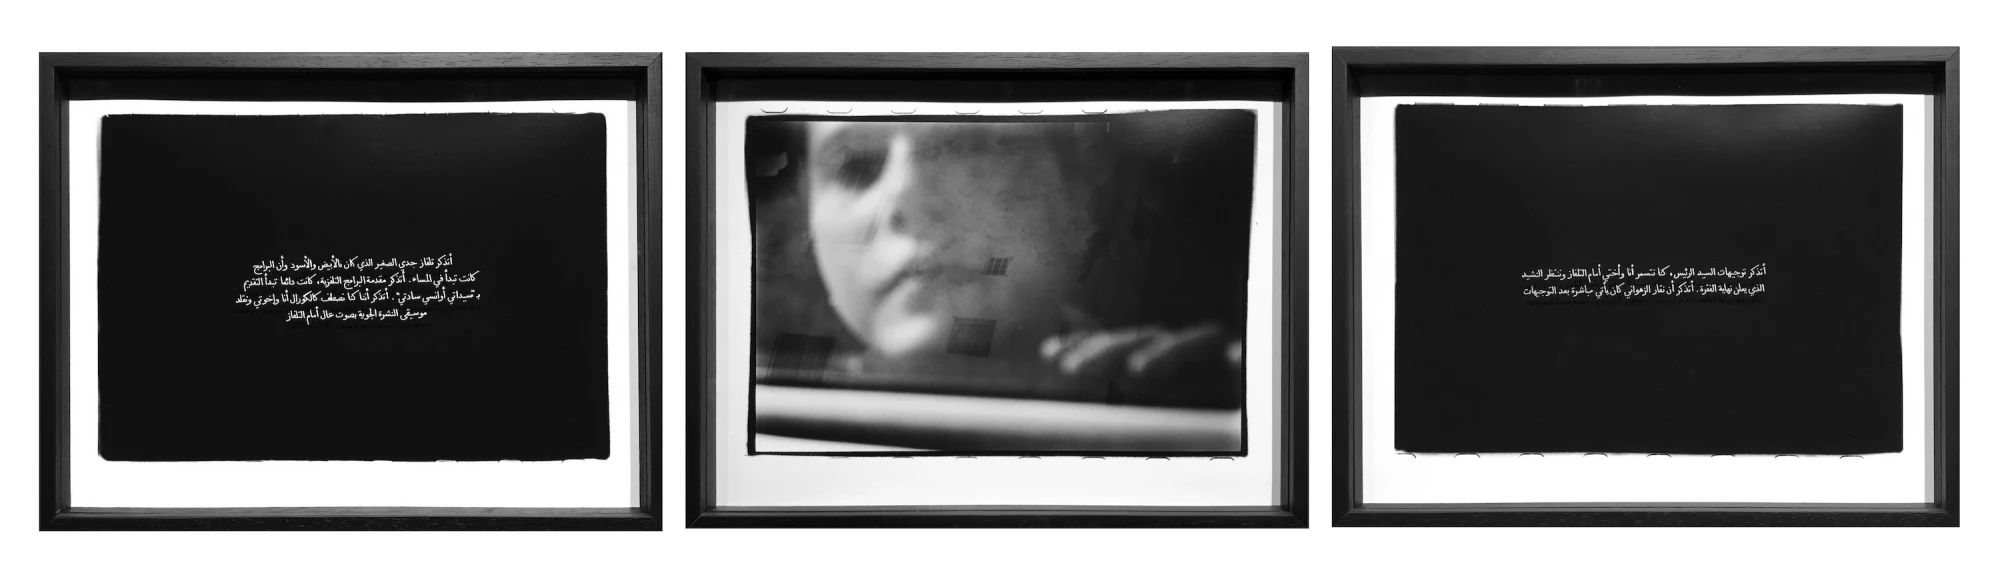 About the Artwork Nicène Kossentini Sequence No. Iii, 2019 Silver Gelatin Print on Baryta Paper and White Ink on Glass 30h X 40w Cm Each (3 Photo Grams)  by Nicène Kossentini